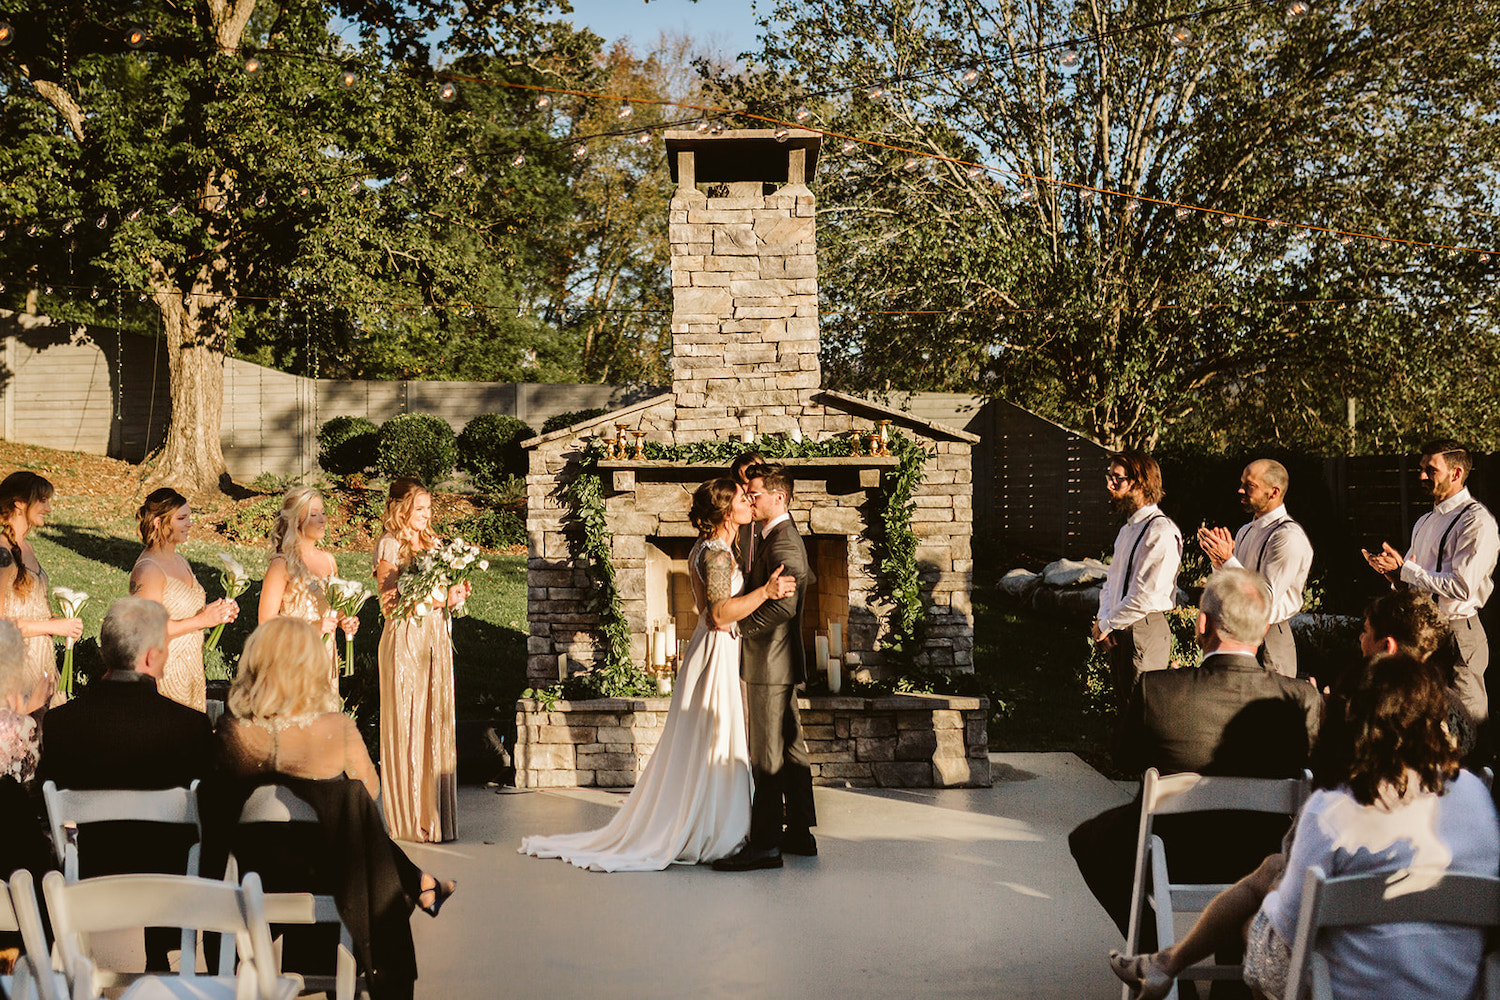 bride and groom share first kiss in front of an outside stone fireplace while wedding guests watch